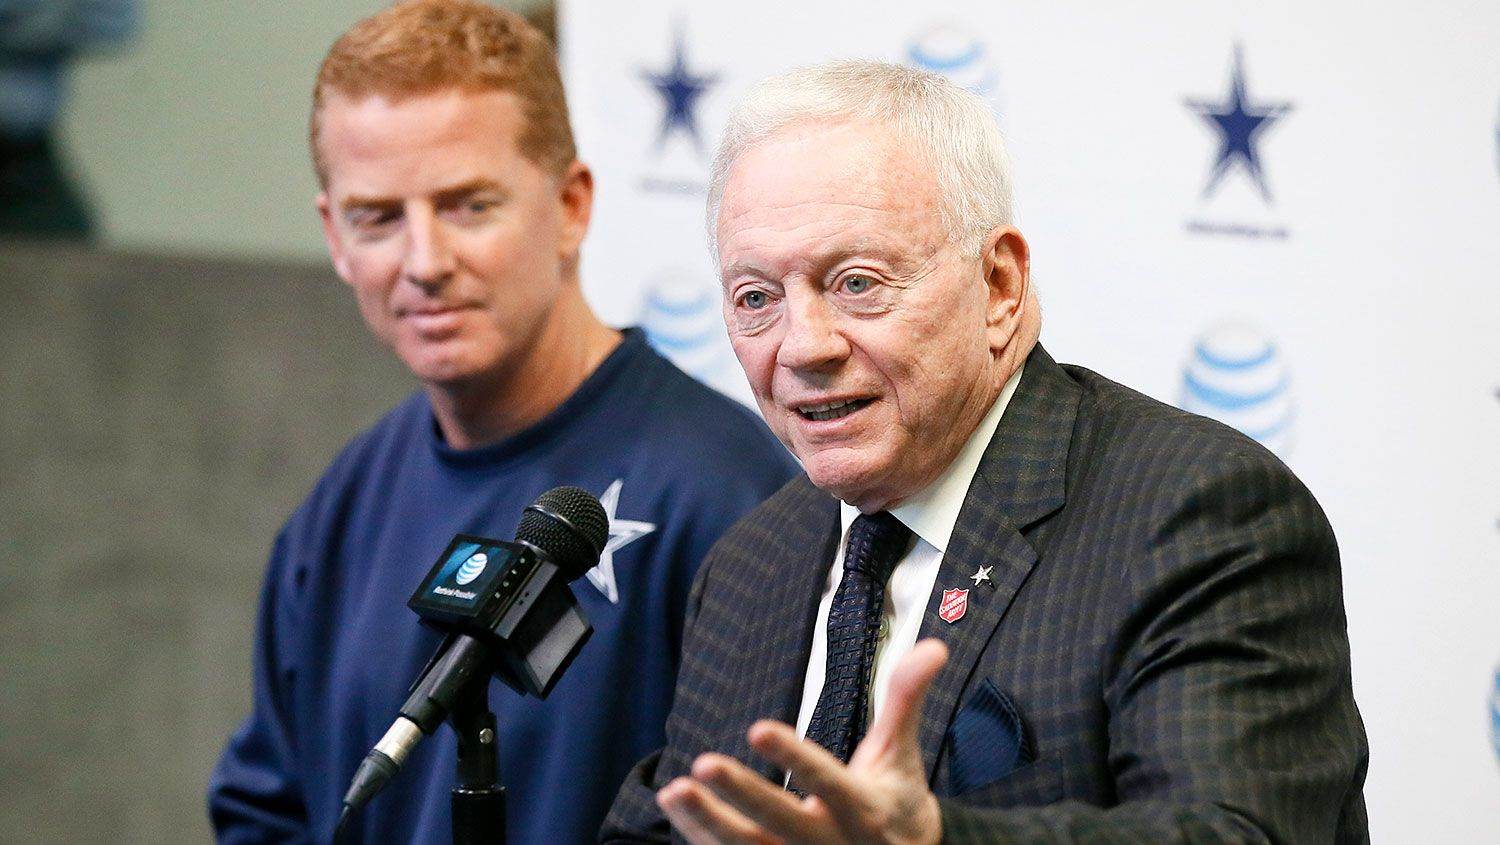 Cowboys Coaching: Who Needs Improvement When "Not Good Enough" Suffices?